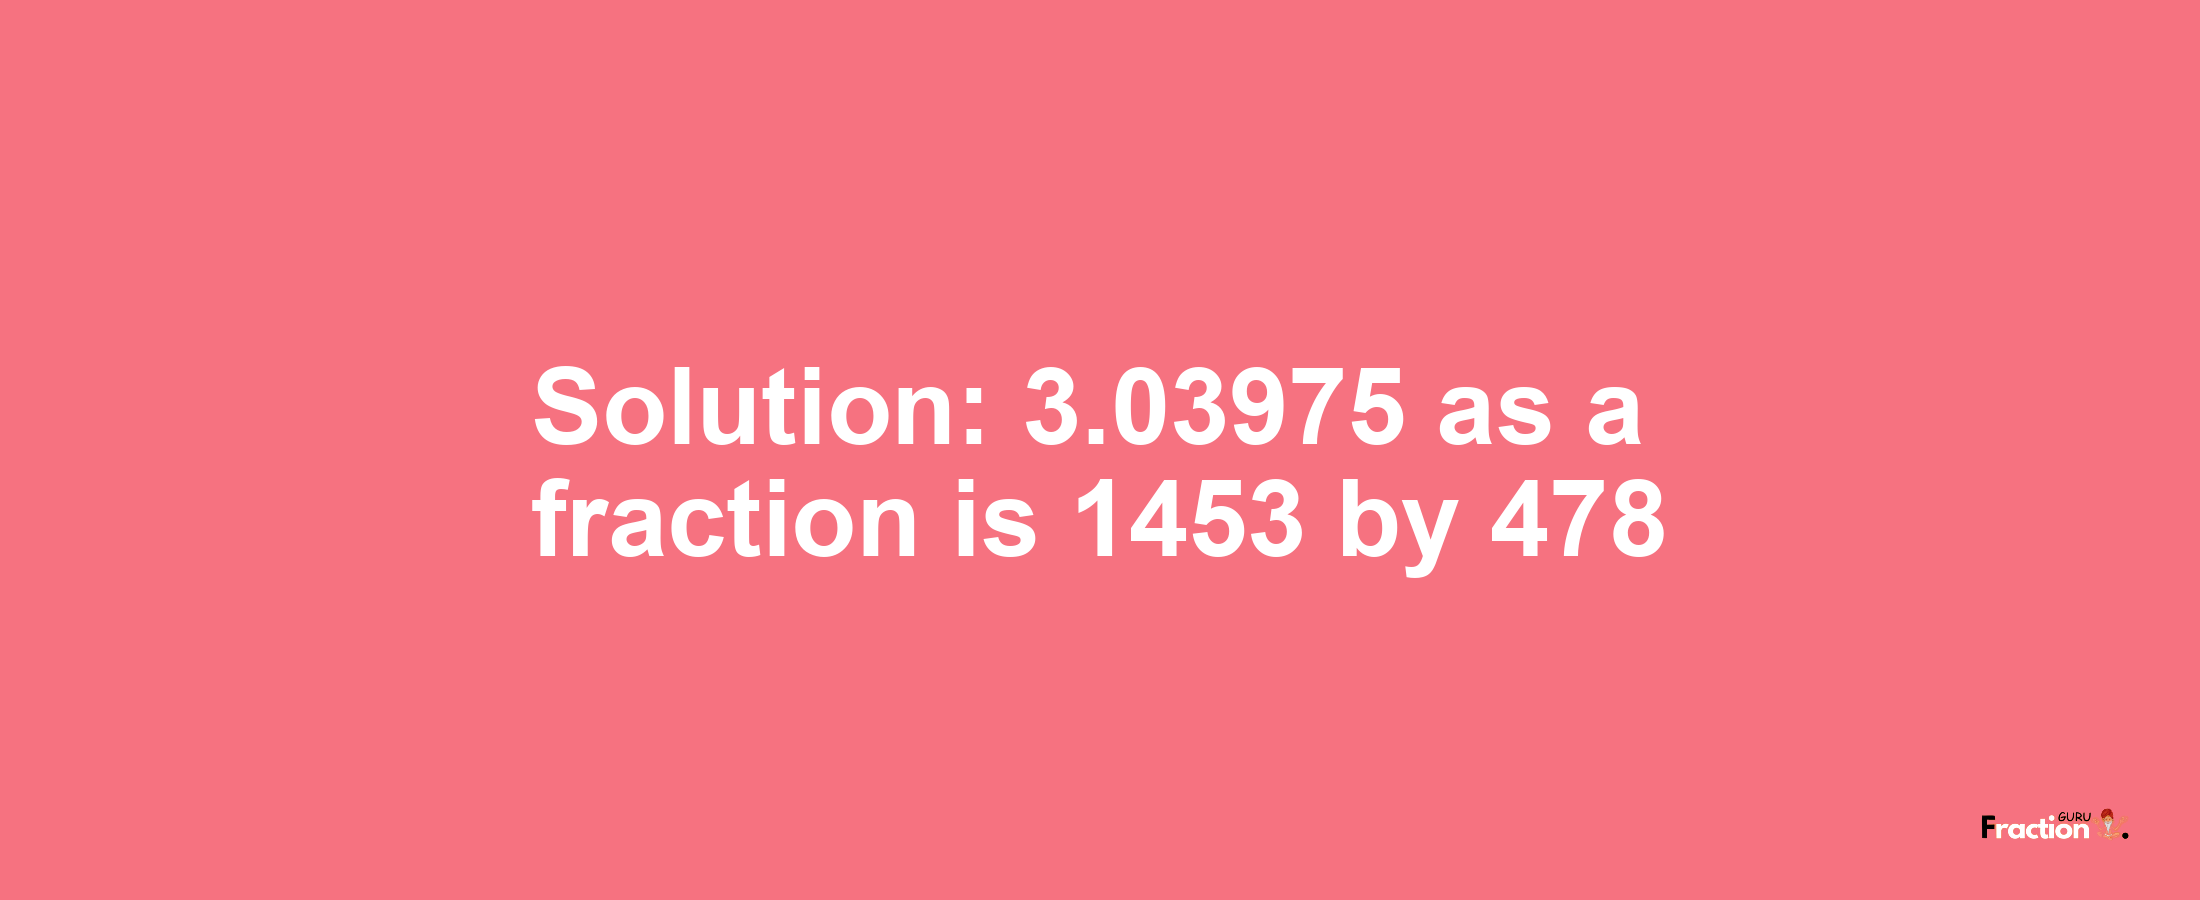 Solution:3.03975 as a fraction is 1453/478